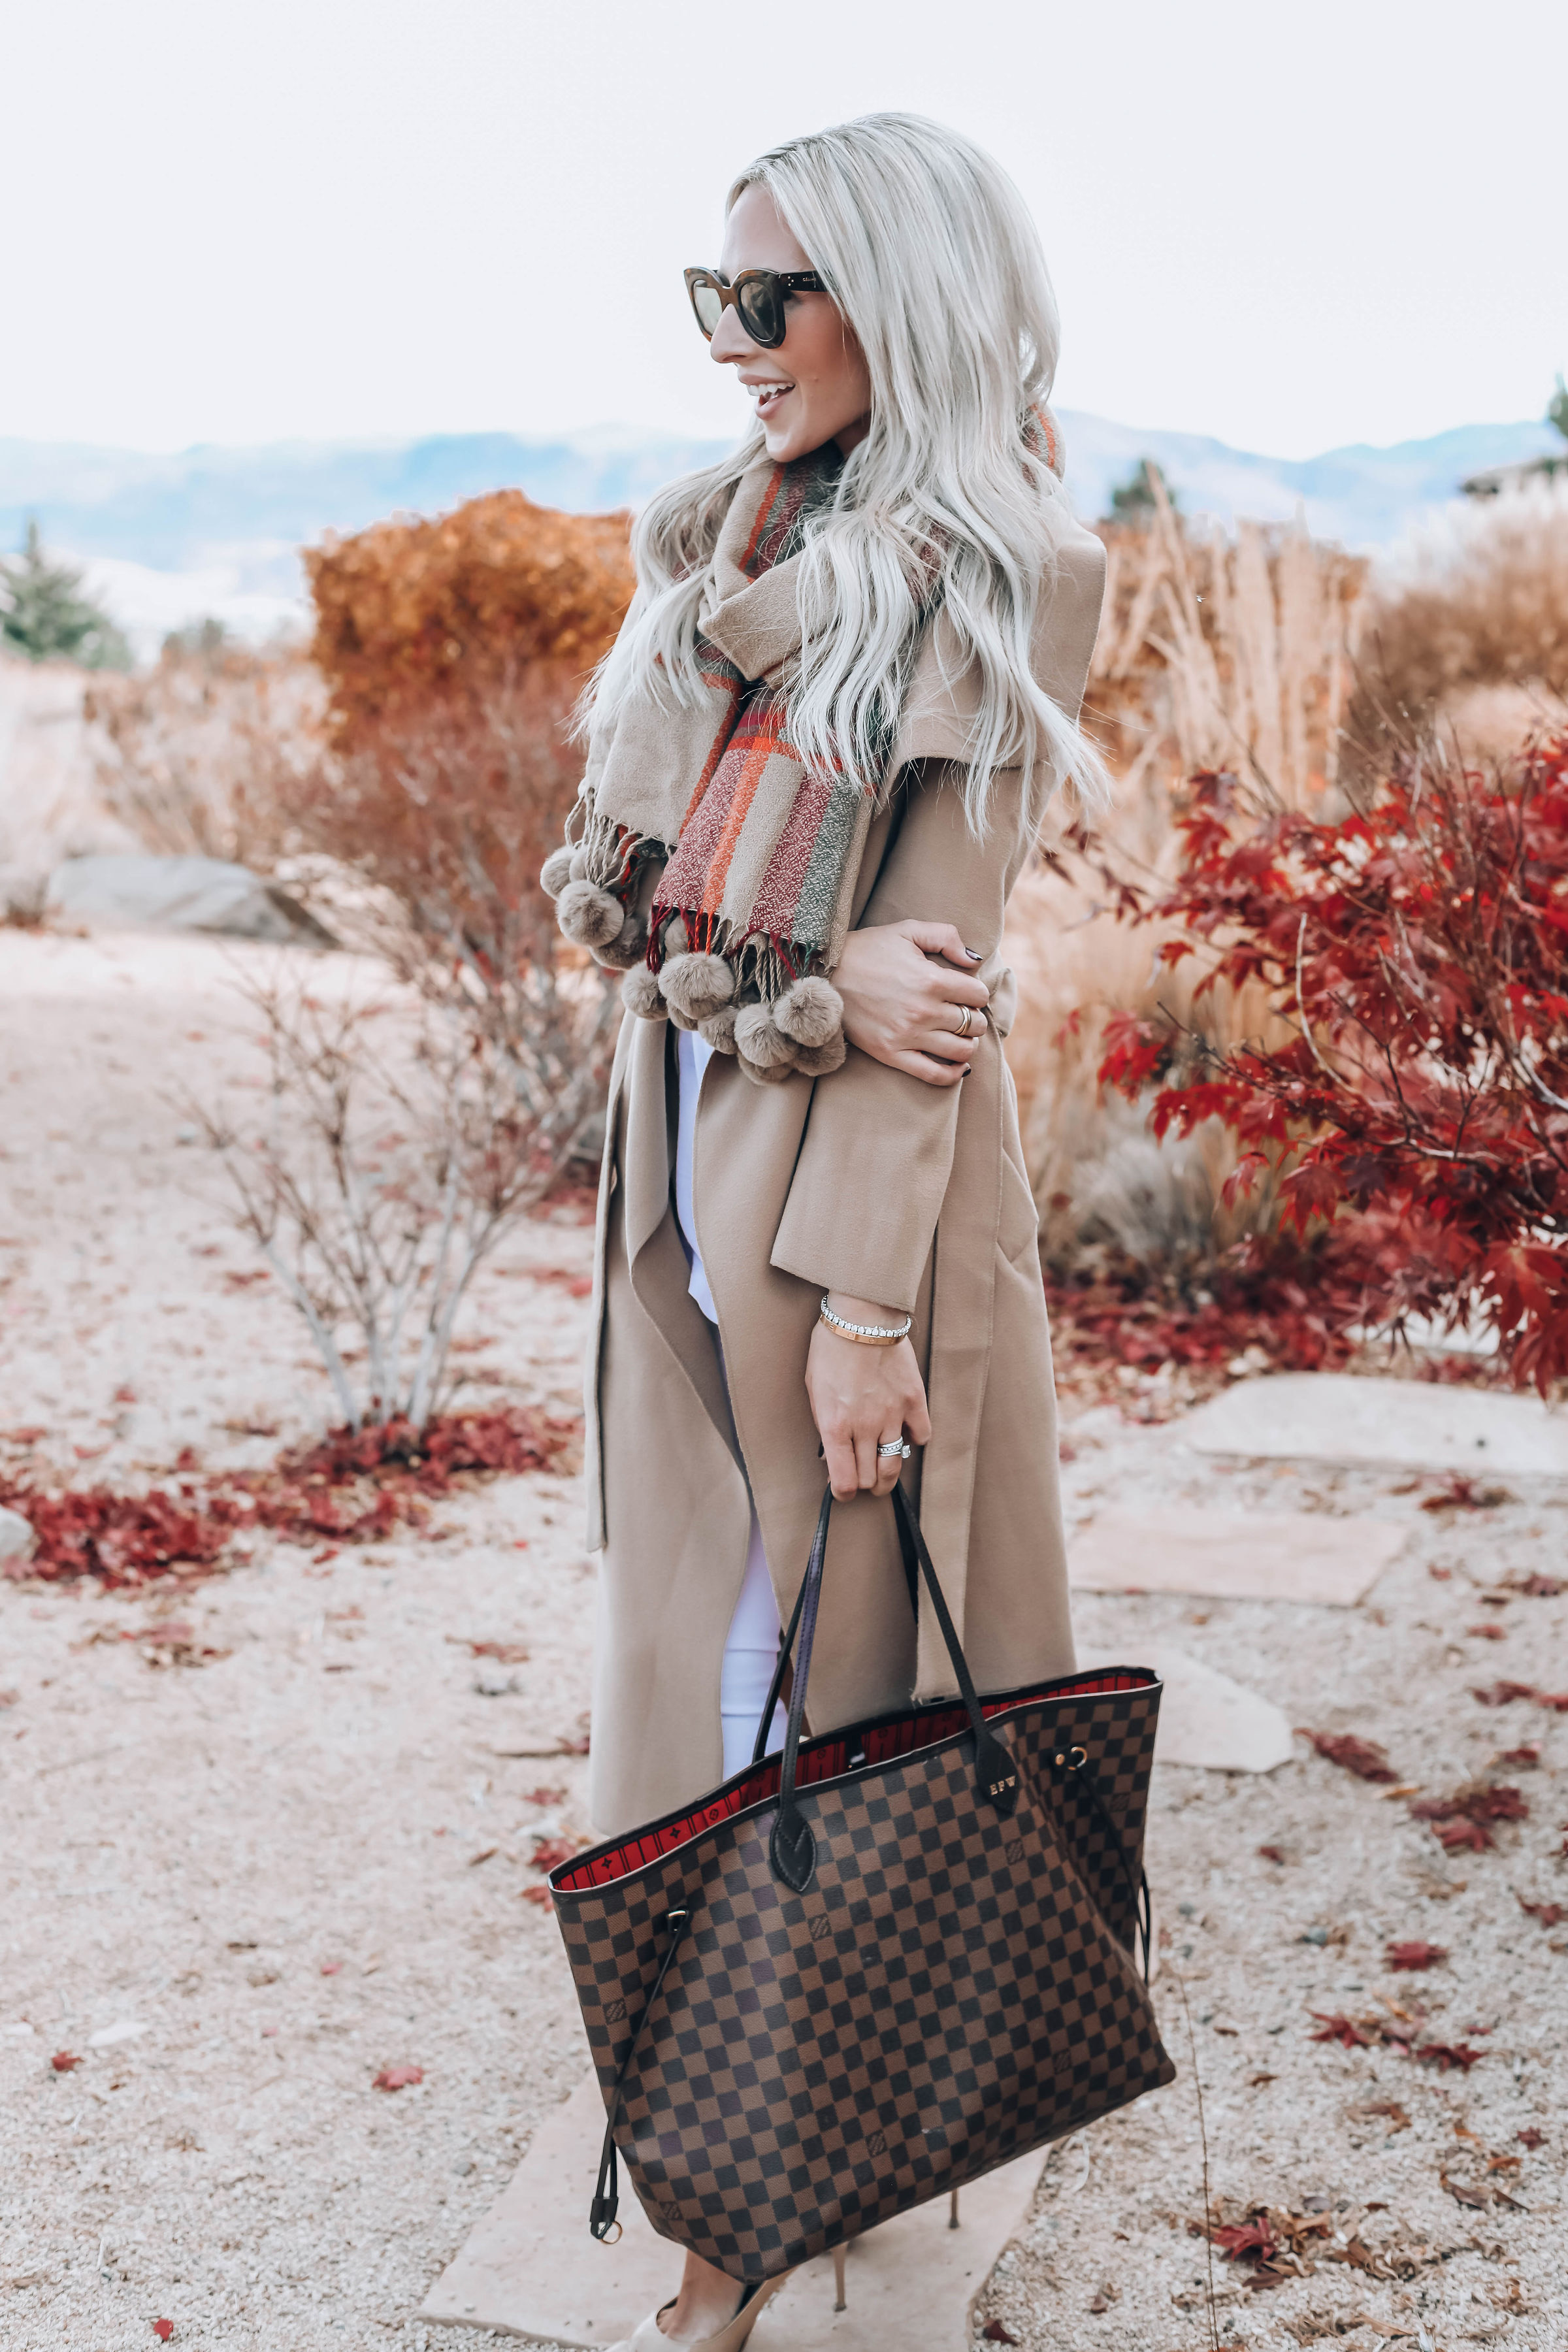 Reno Blogger, Emily Farren Wieczorek shares her secret weapon for fall and winter - this $50 marked down to $20 Classic Camel Coat from Boohoo